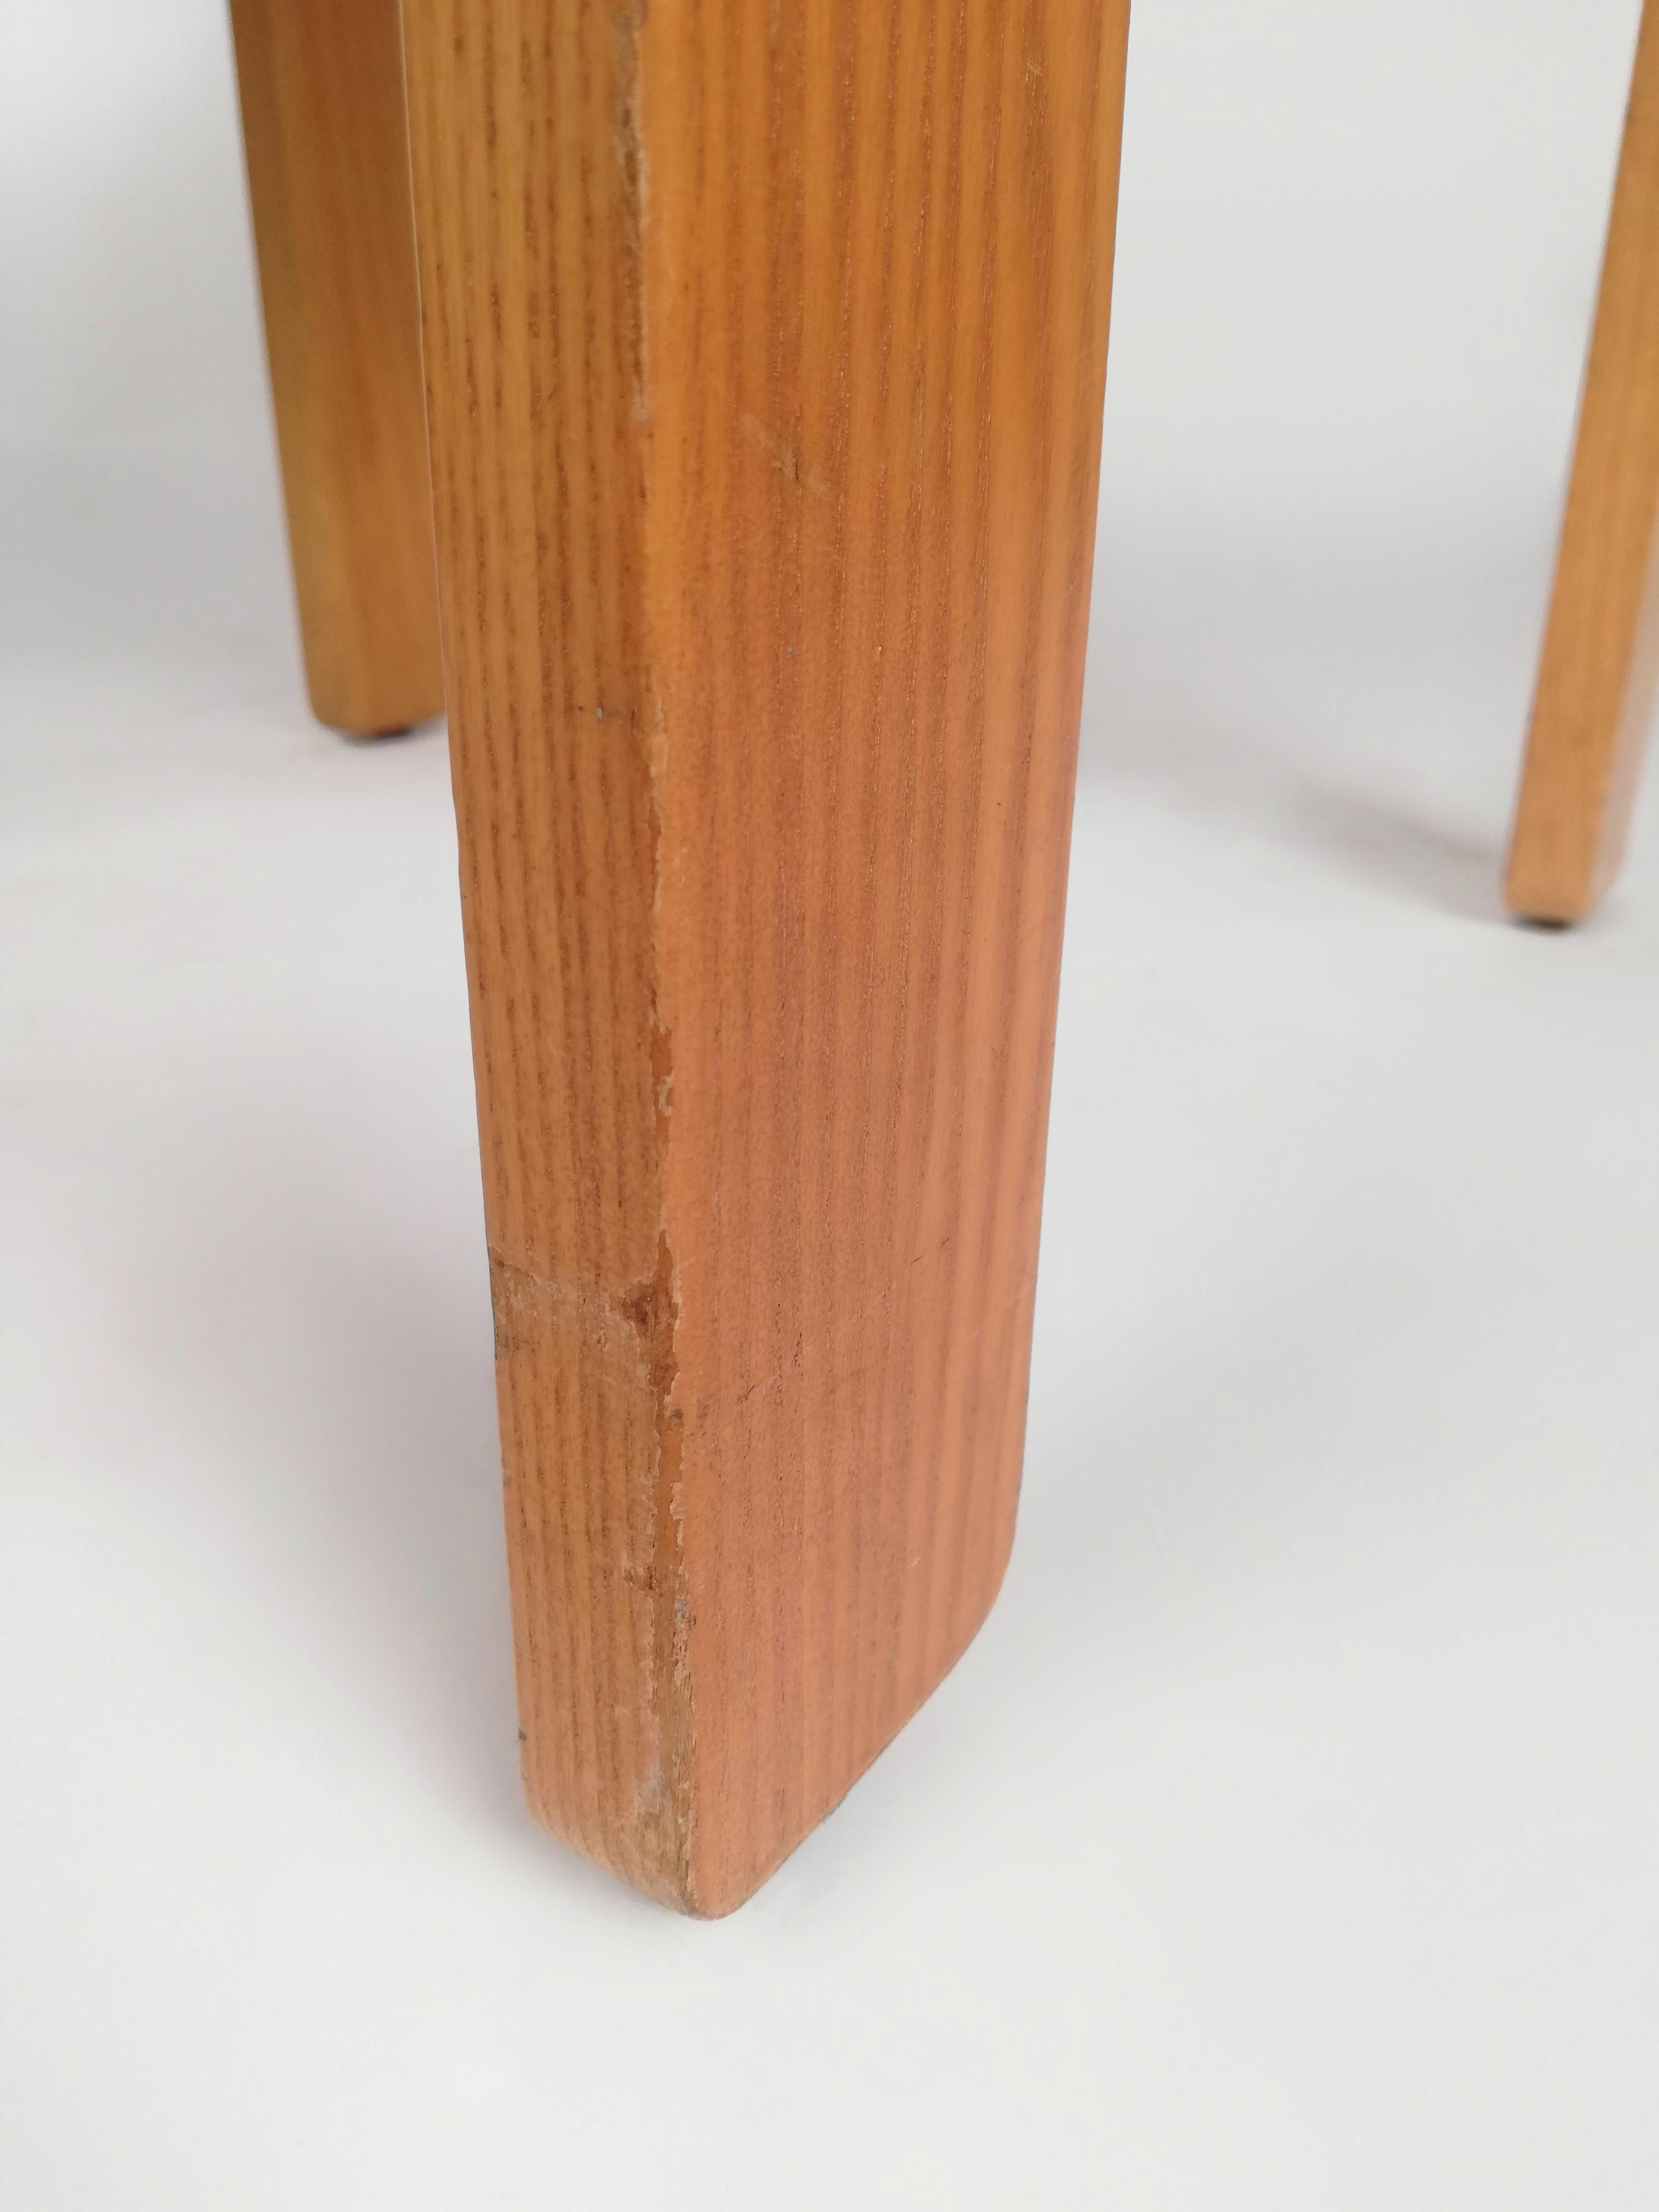 6 Curved Plywood Dining Chairs by Molteni in the style of Scarpa, Italy, 1970s For Sale 5